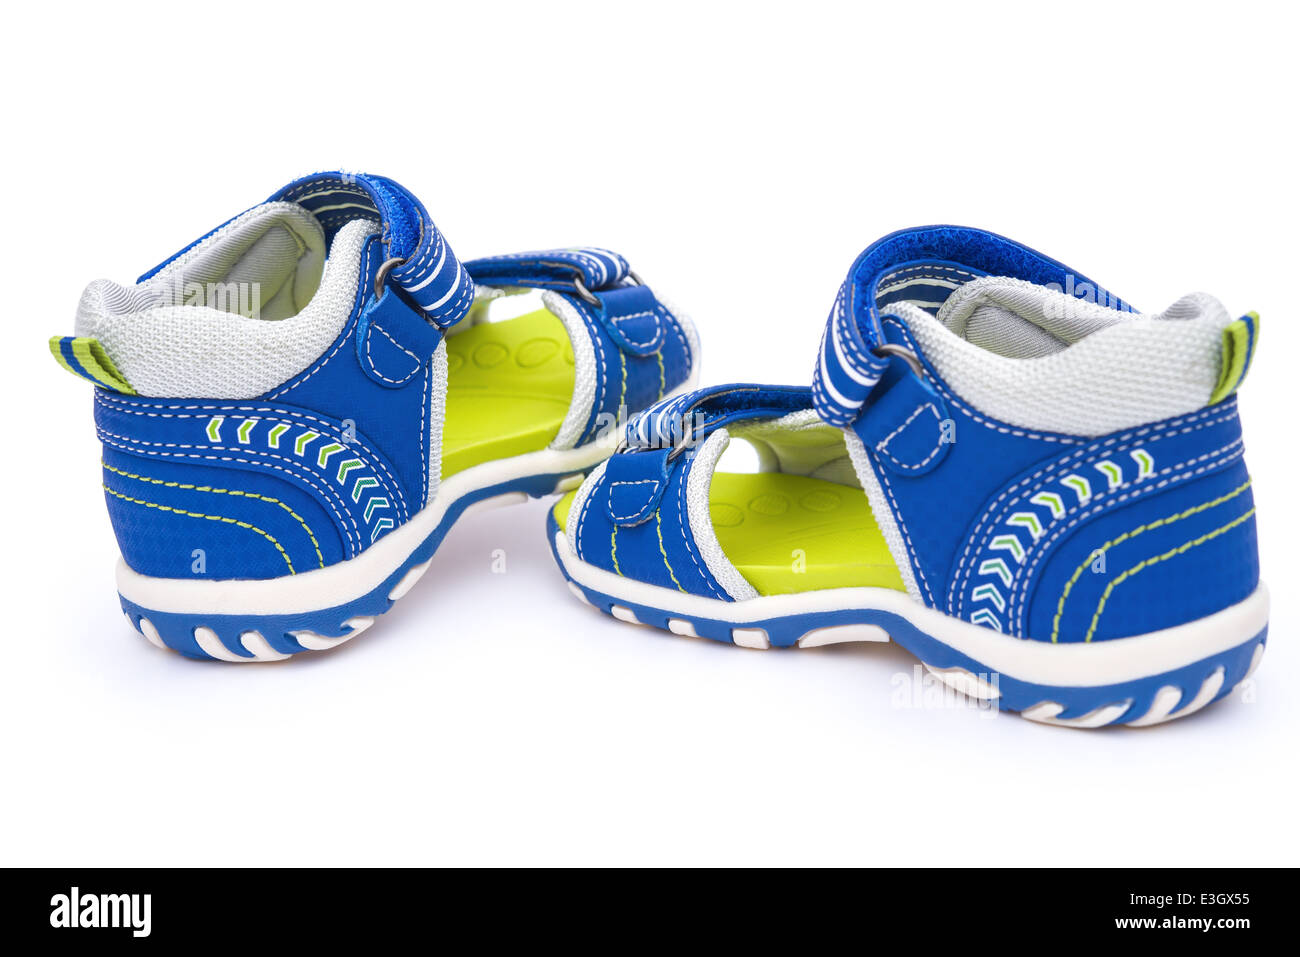 pair of blue sandals for kid on white background Stock Photo